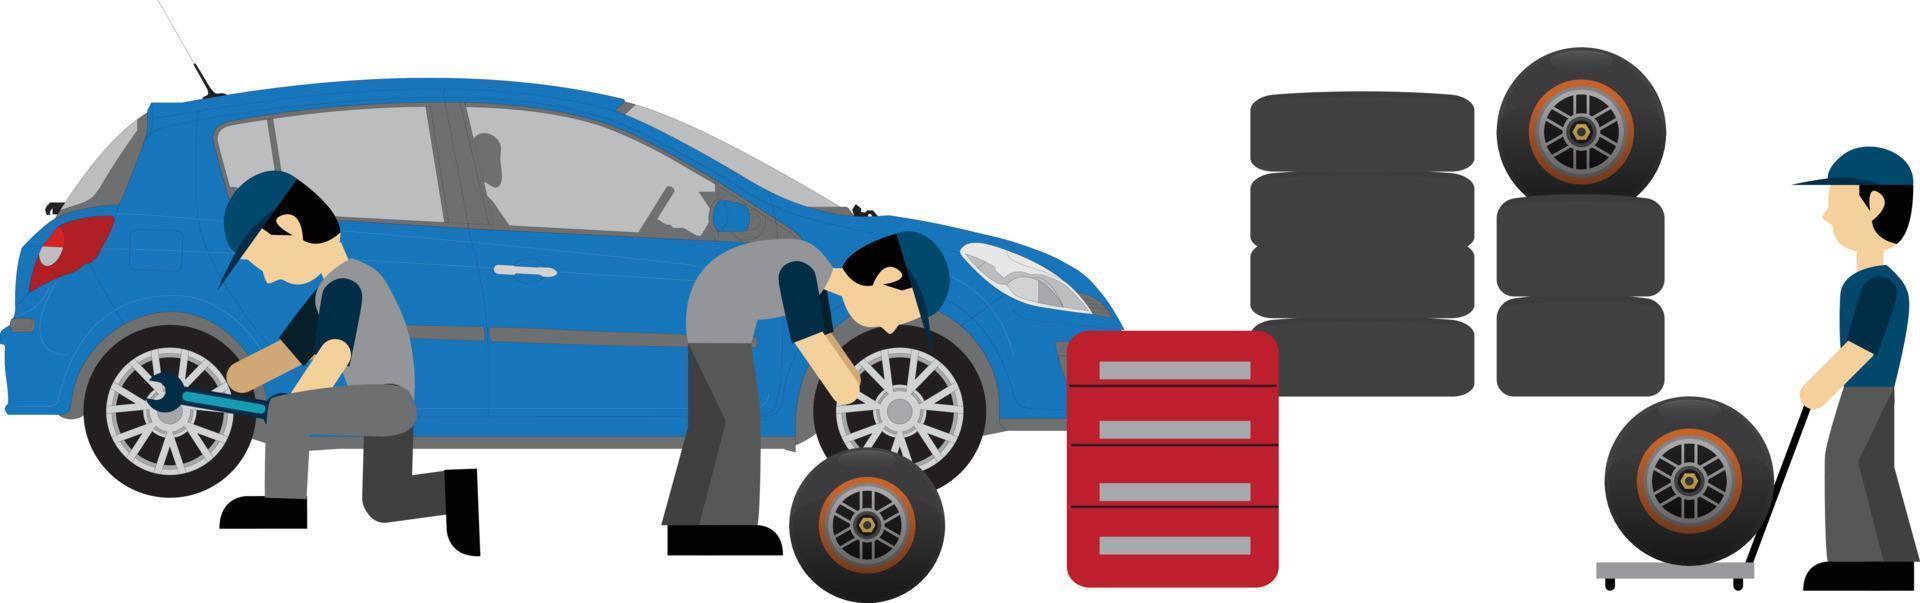 Mechanic in a garage set. Wheels and tyre fitting service. Transportation, tire repair, computerized balancing collection. Editable vector illustration in cartoon style isolated on white background